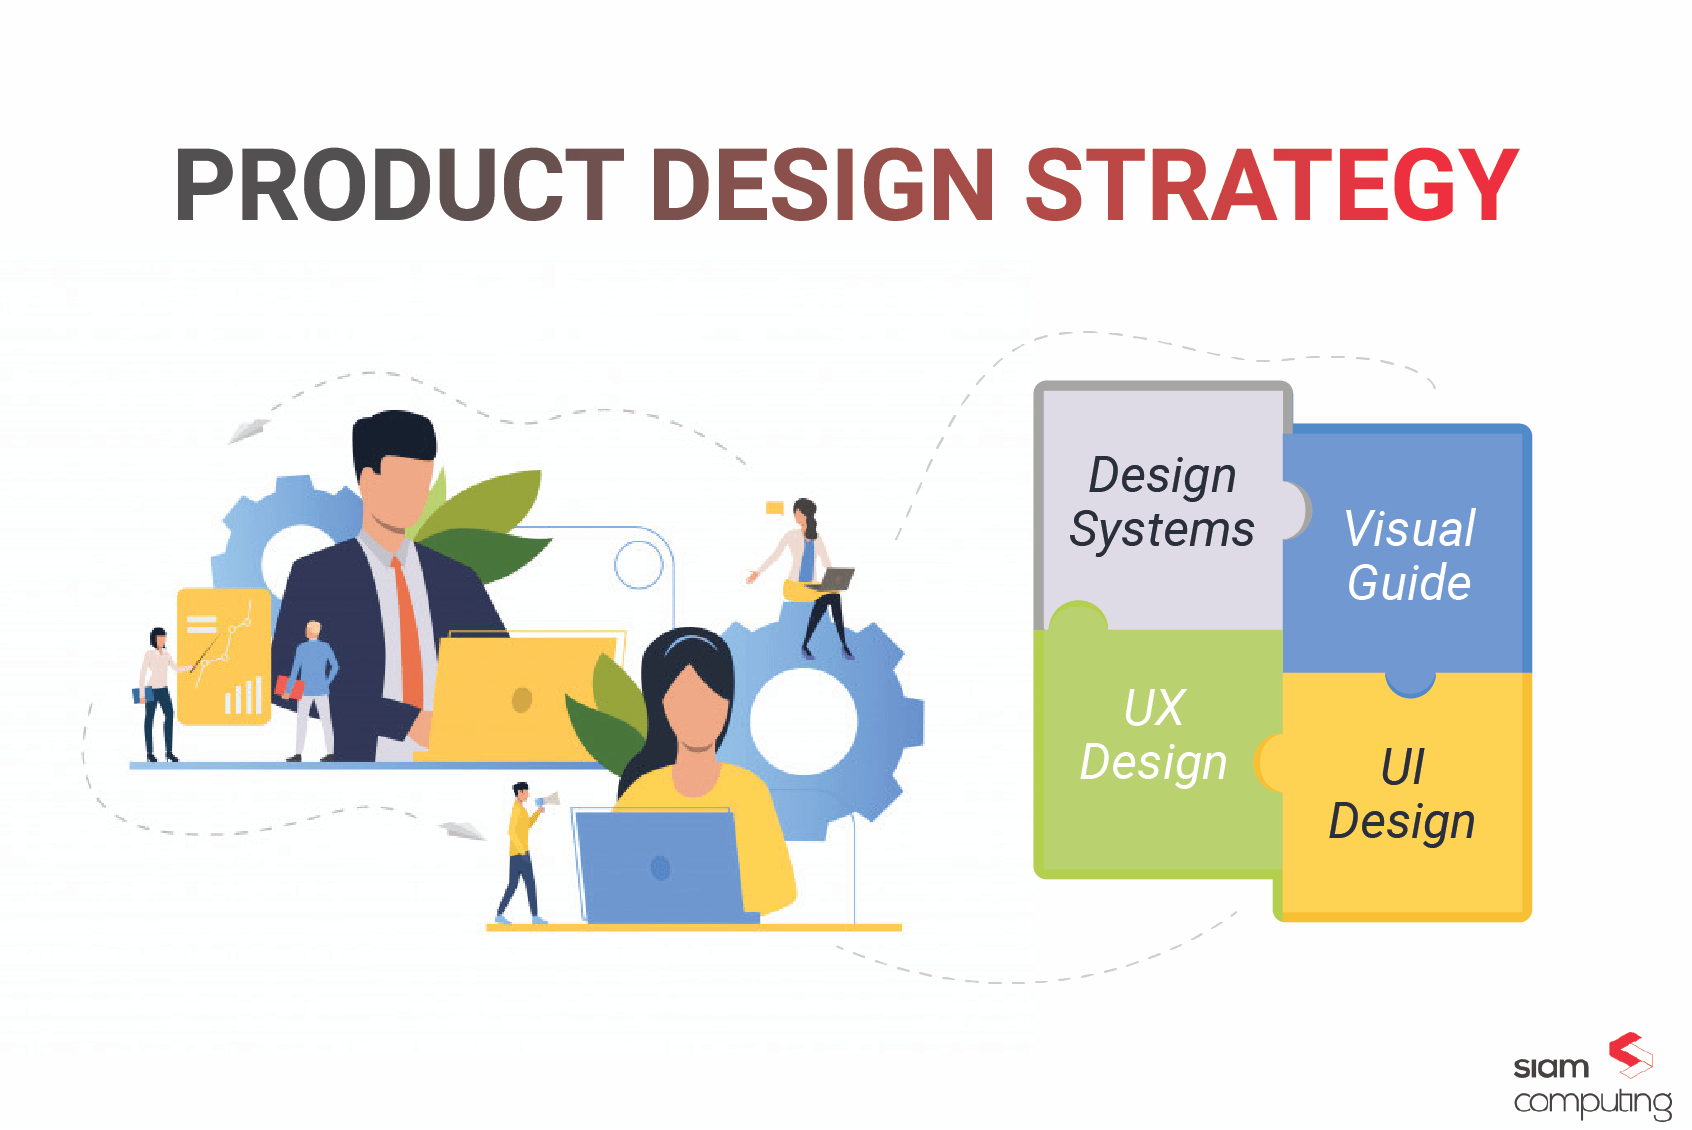 Product design strategy